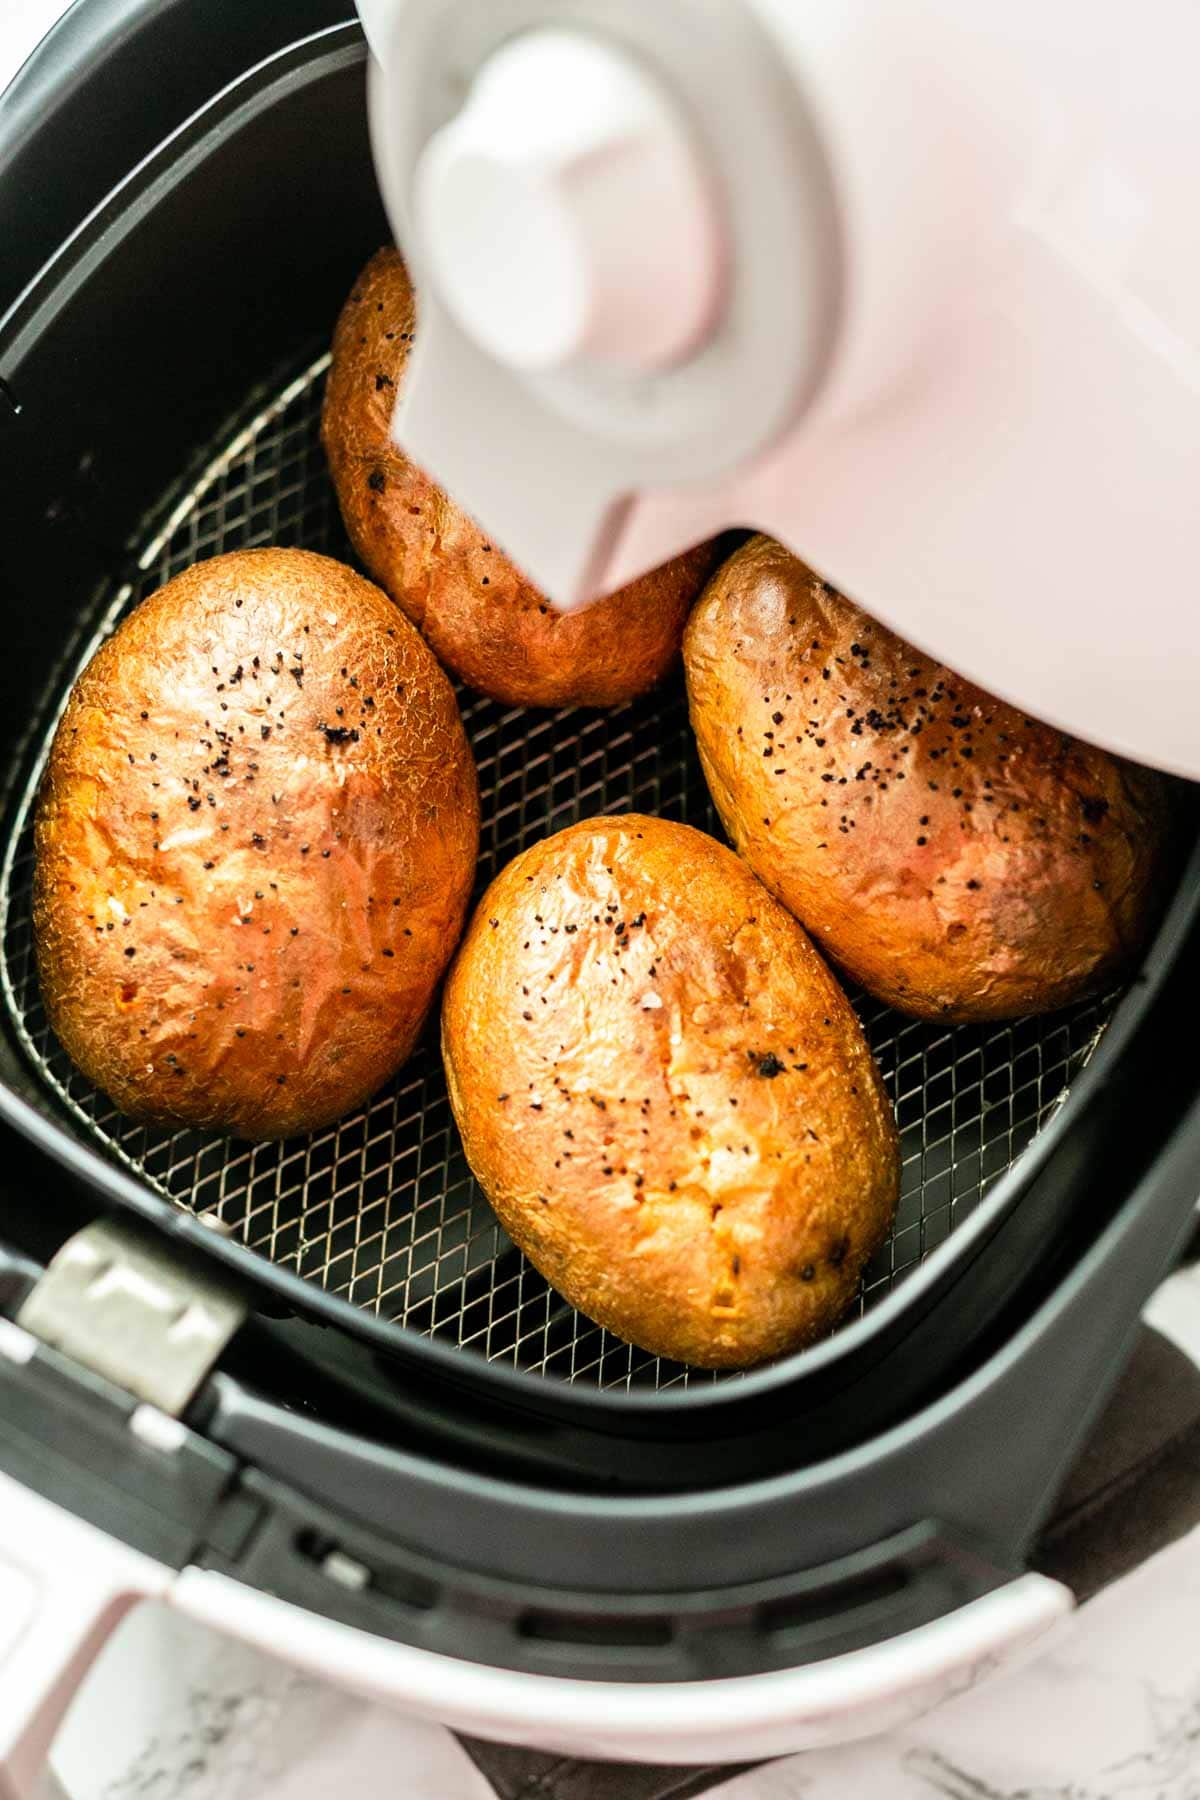 How To Reheat A Baked Potato In Air Fryer